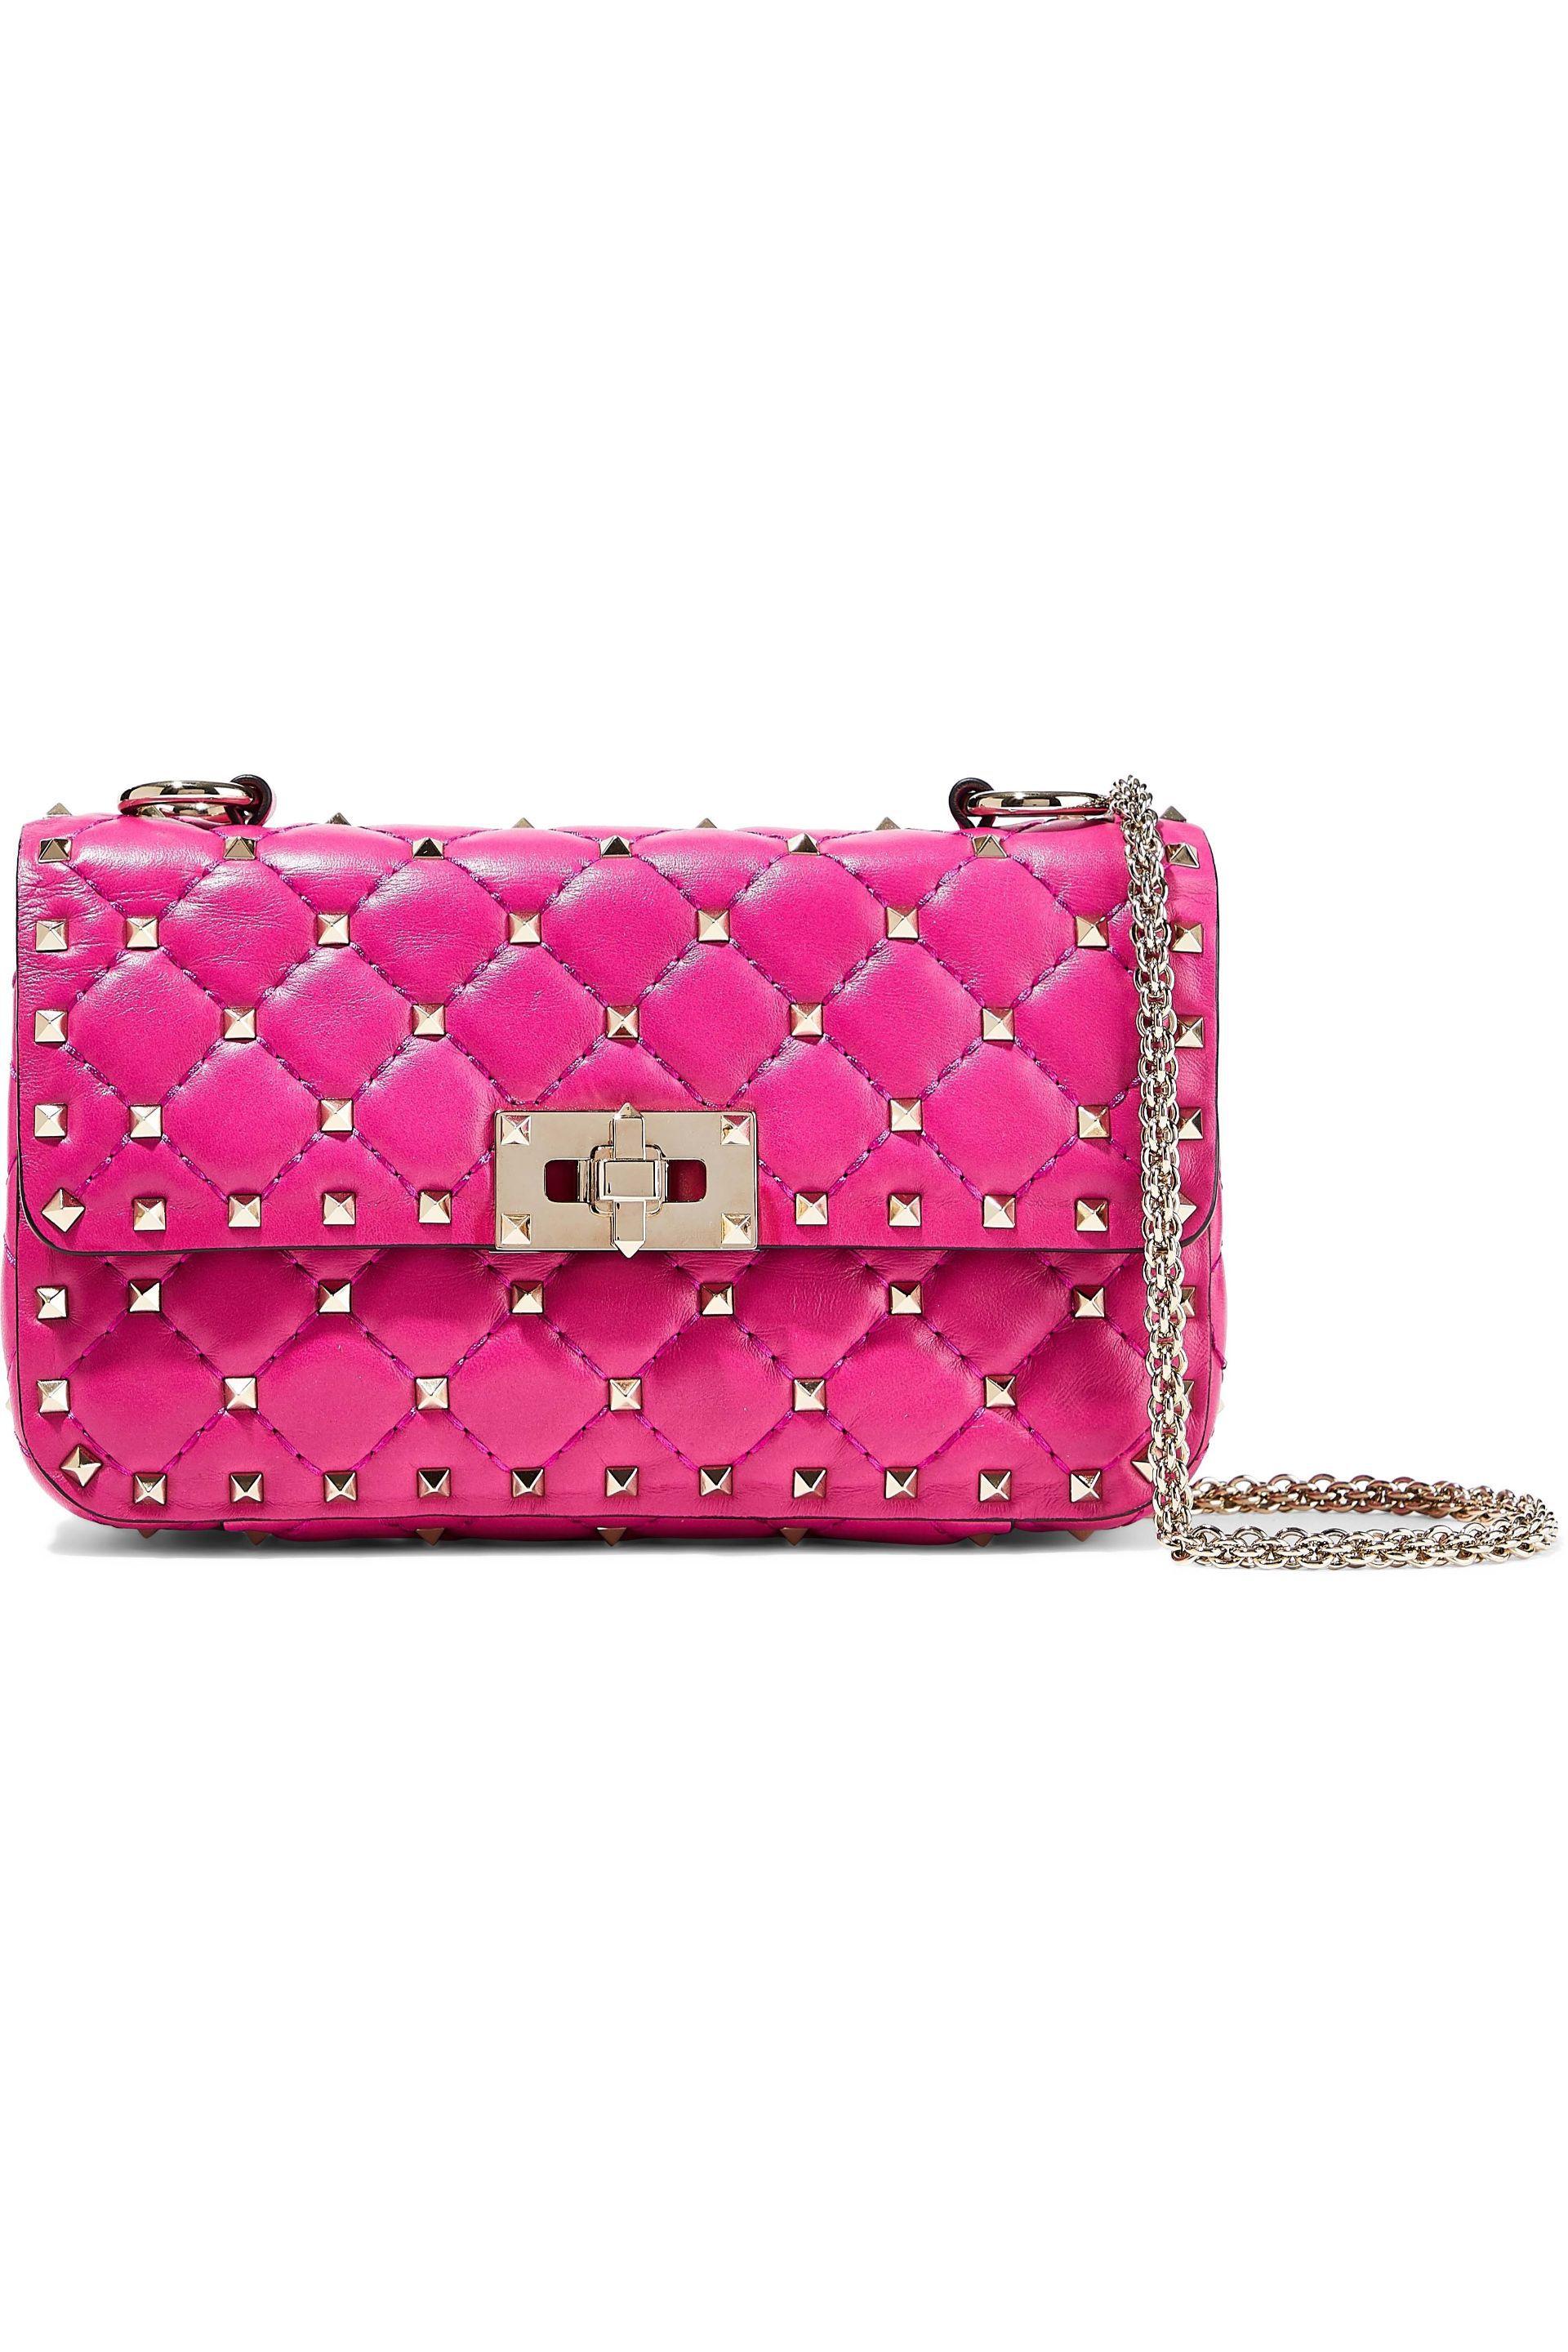 Valentino Rockstud Spike Quilted Leather Shoulder Bag Fuchsia in Pink - Lyst